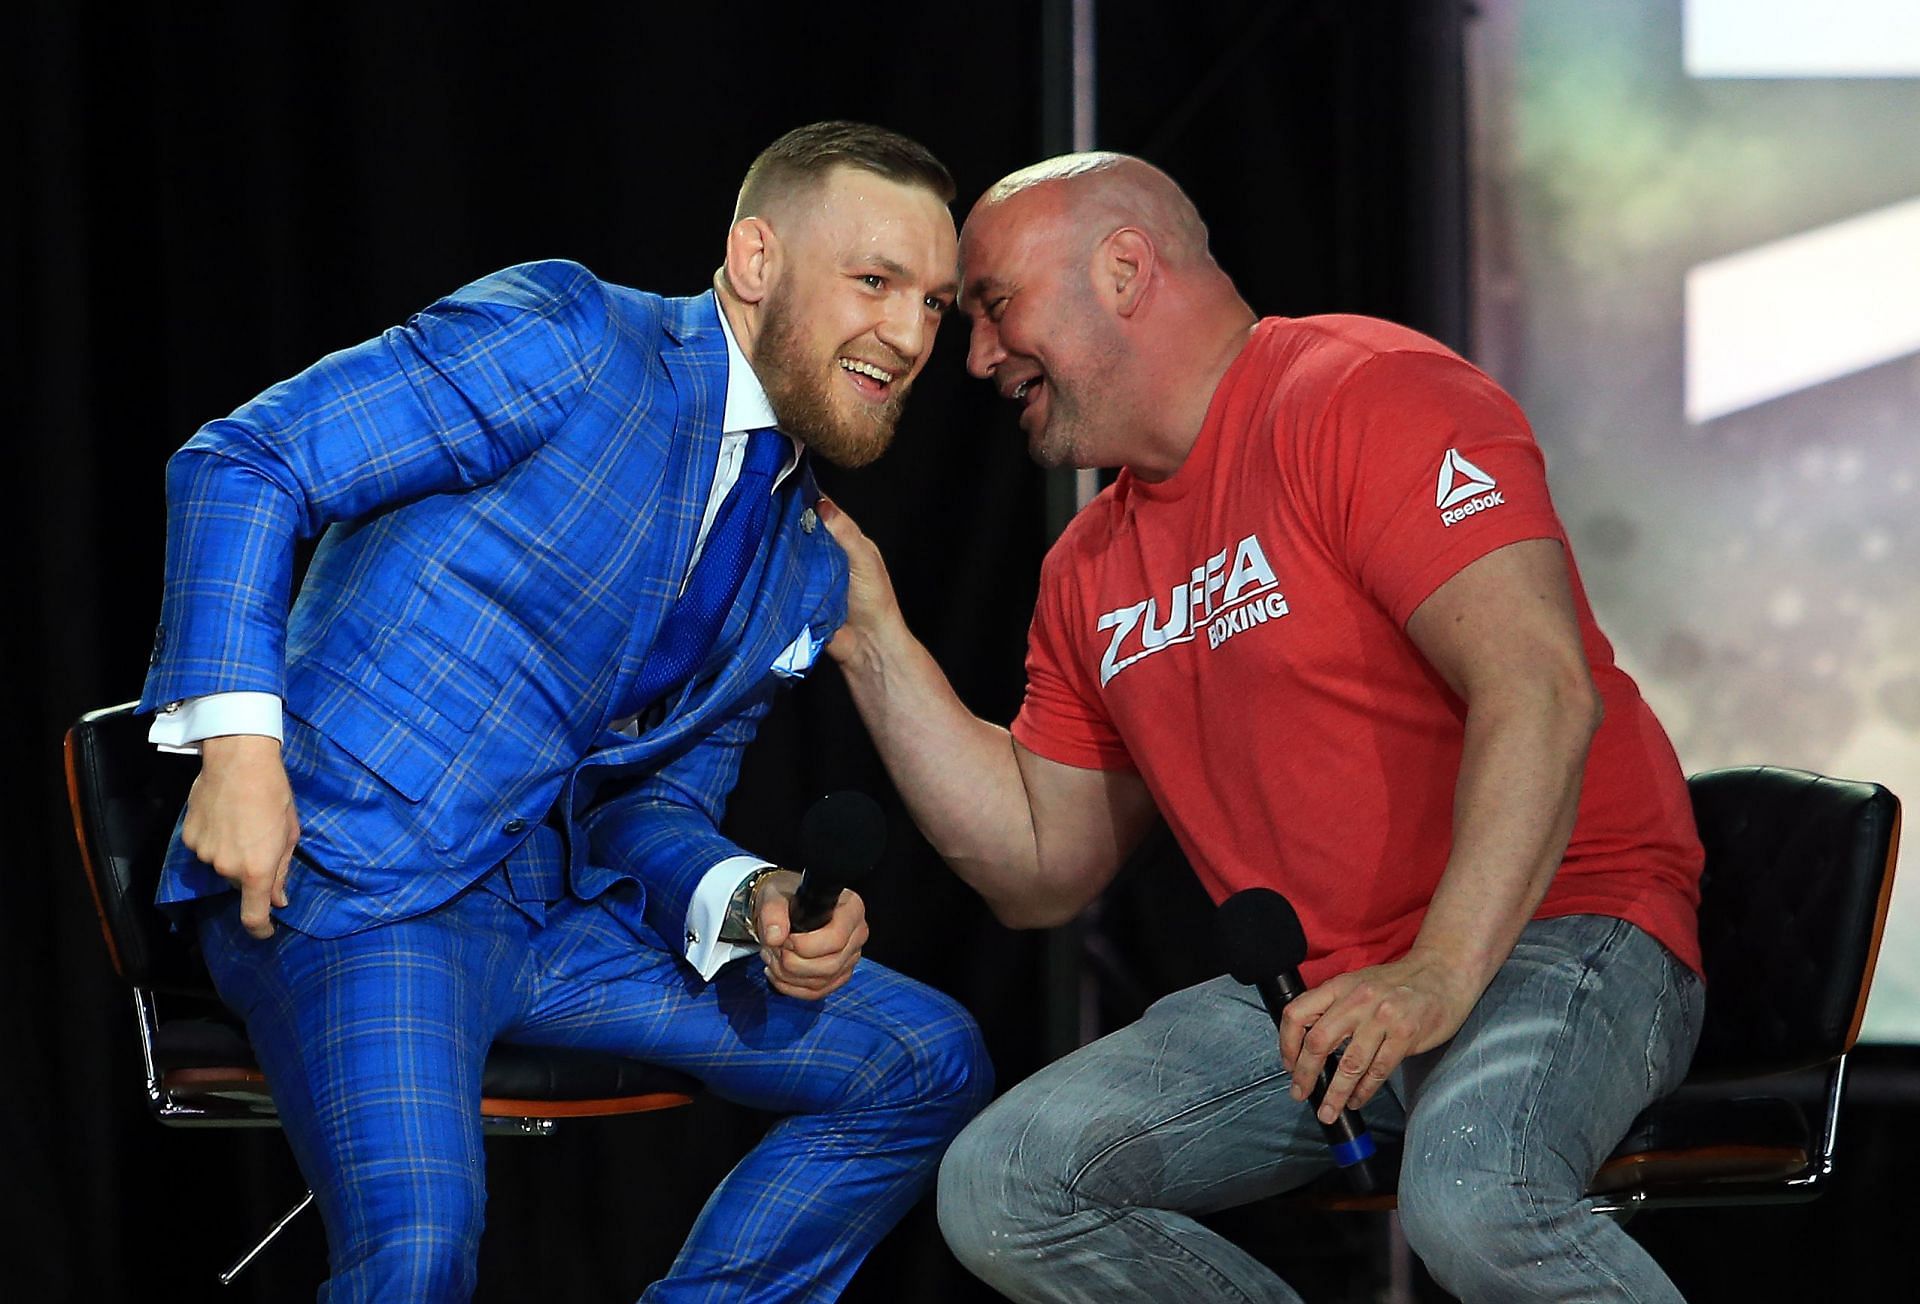 Dana White appeared to tweak the format of TUF 22 to suit Conor McGregor